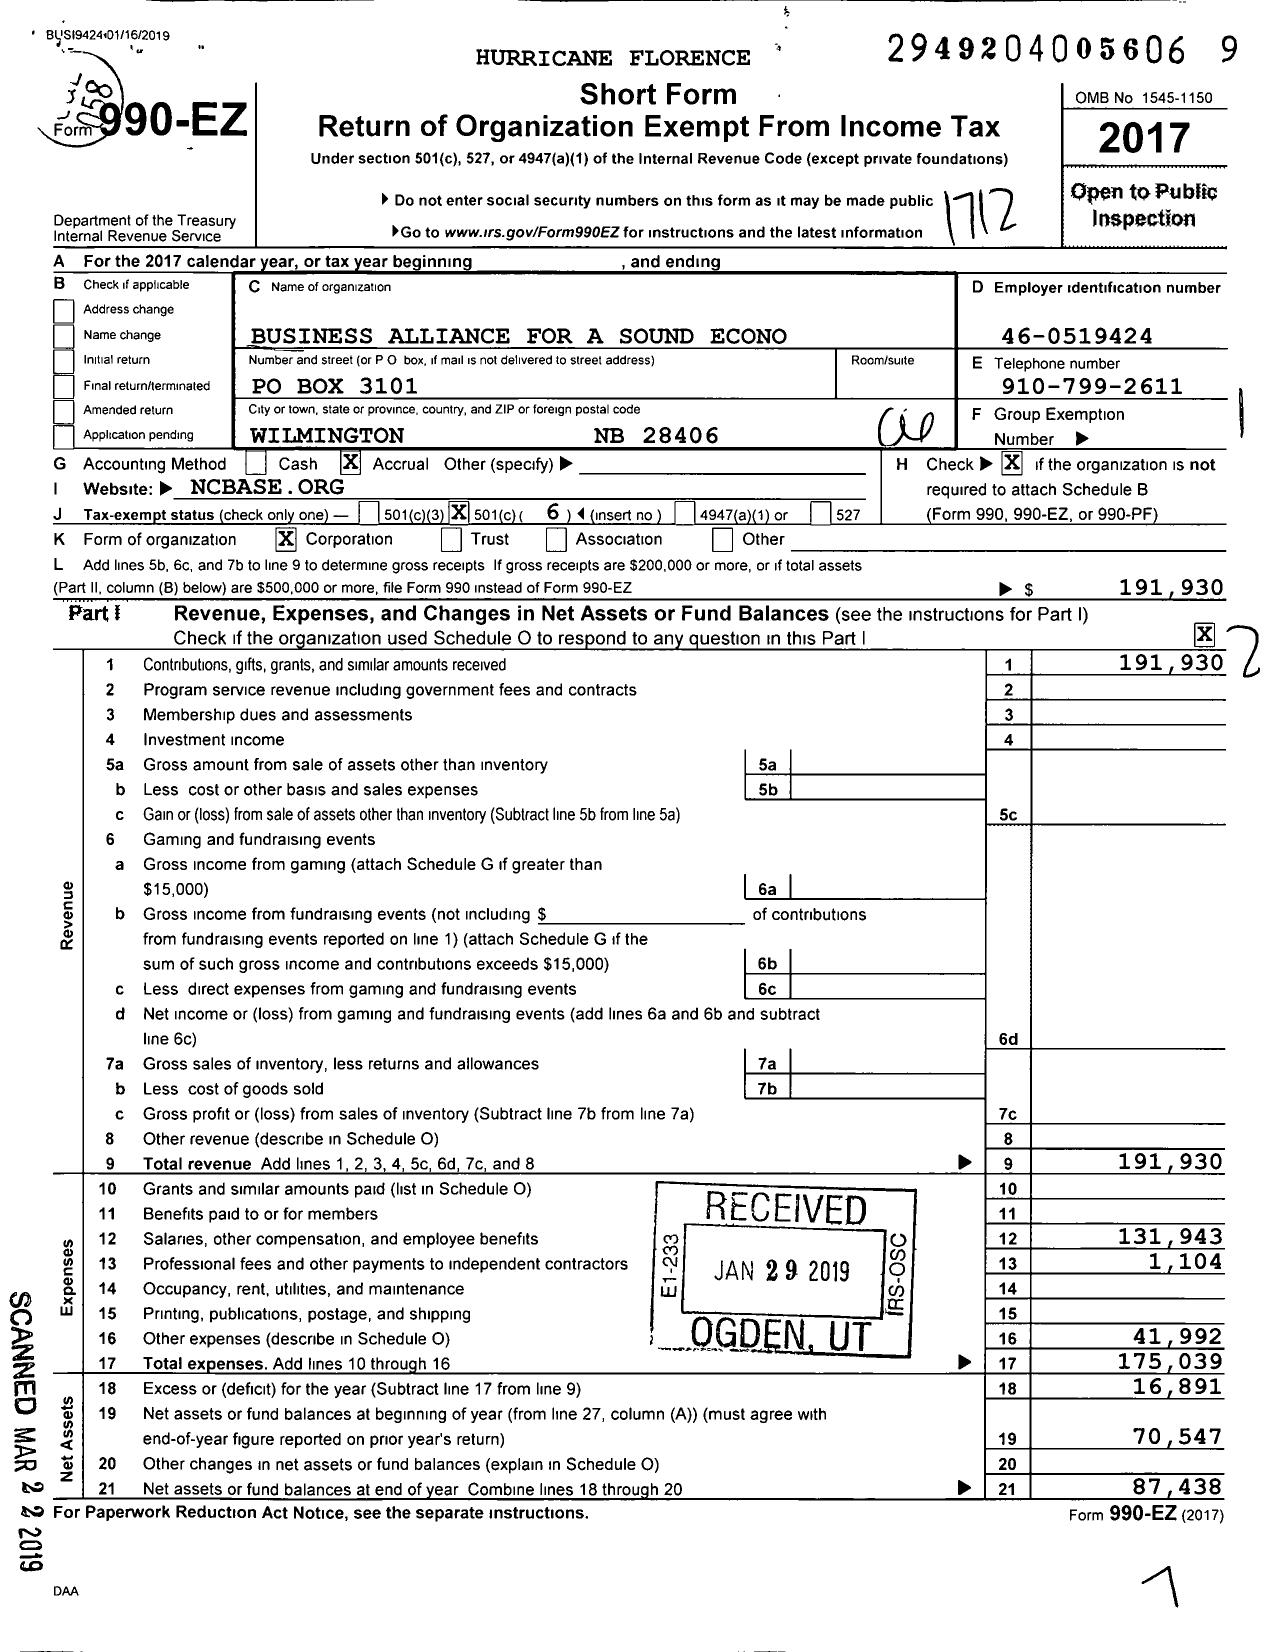 Image of first page of 2017 Form 990EO for Business Alliance for A Sound Econo